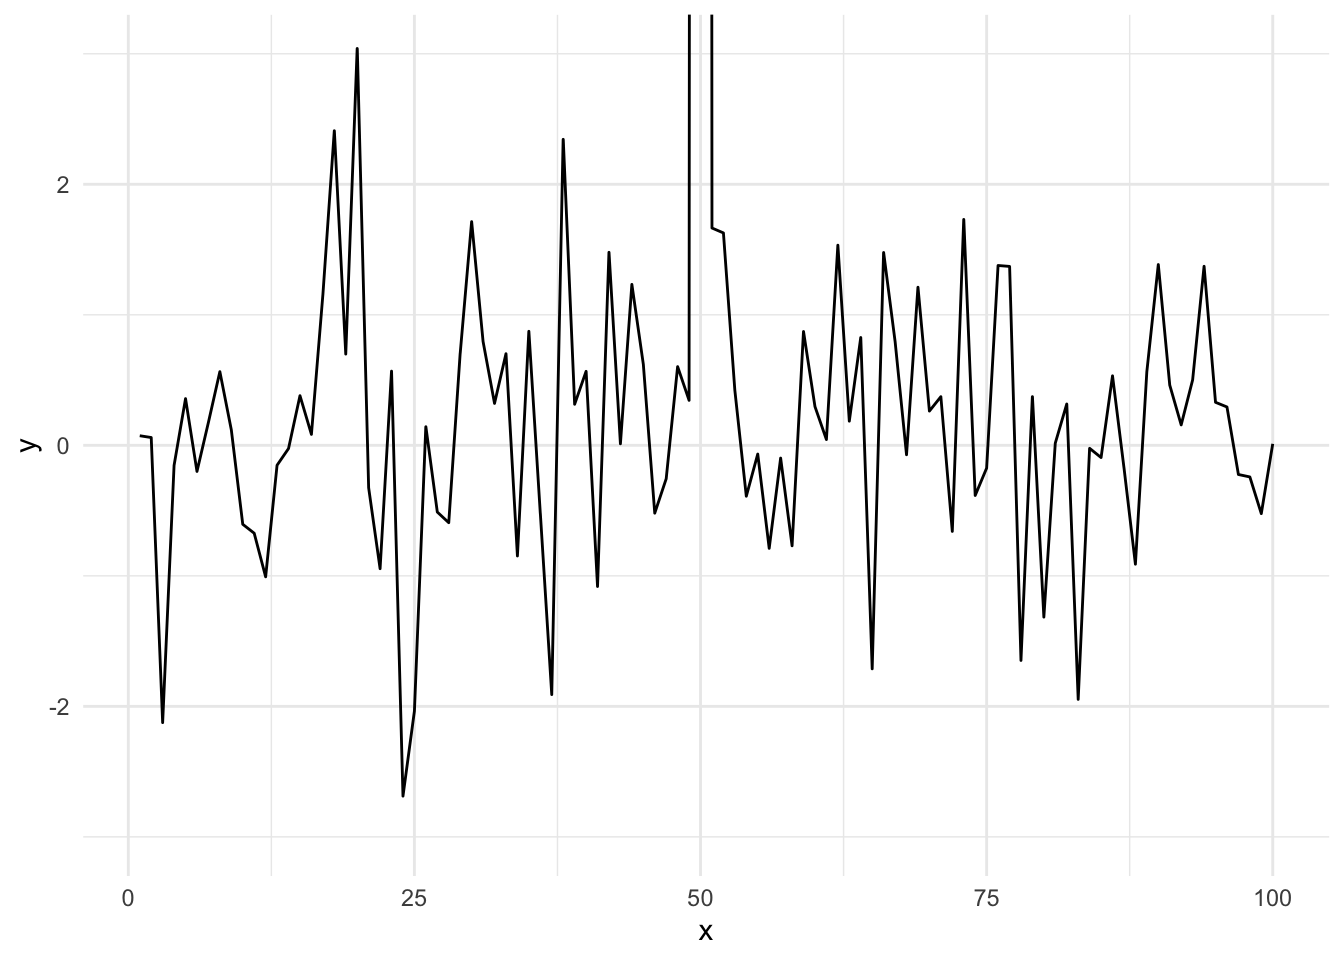 Time series plot with restricted y-axis range